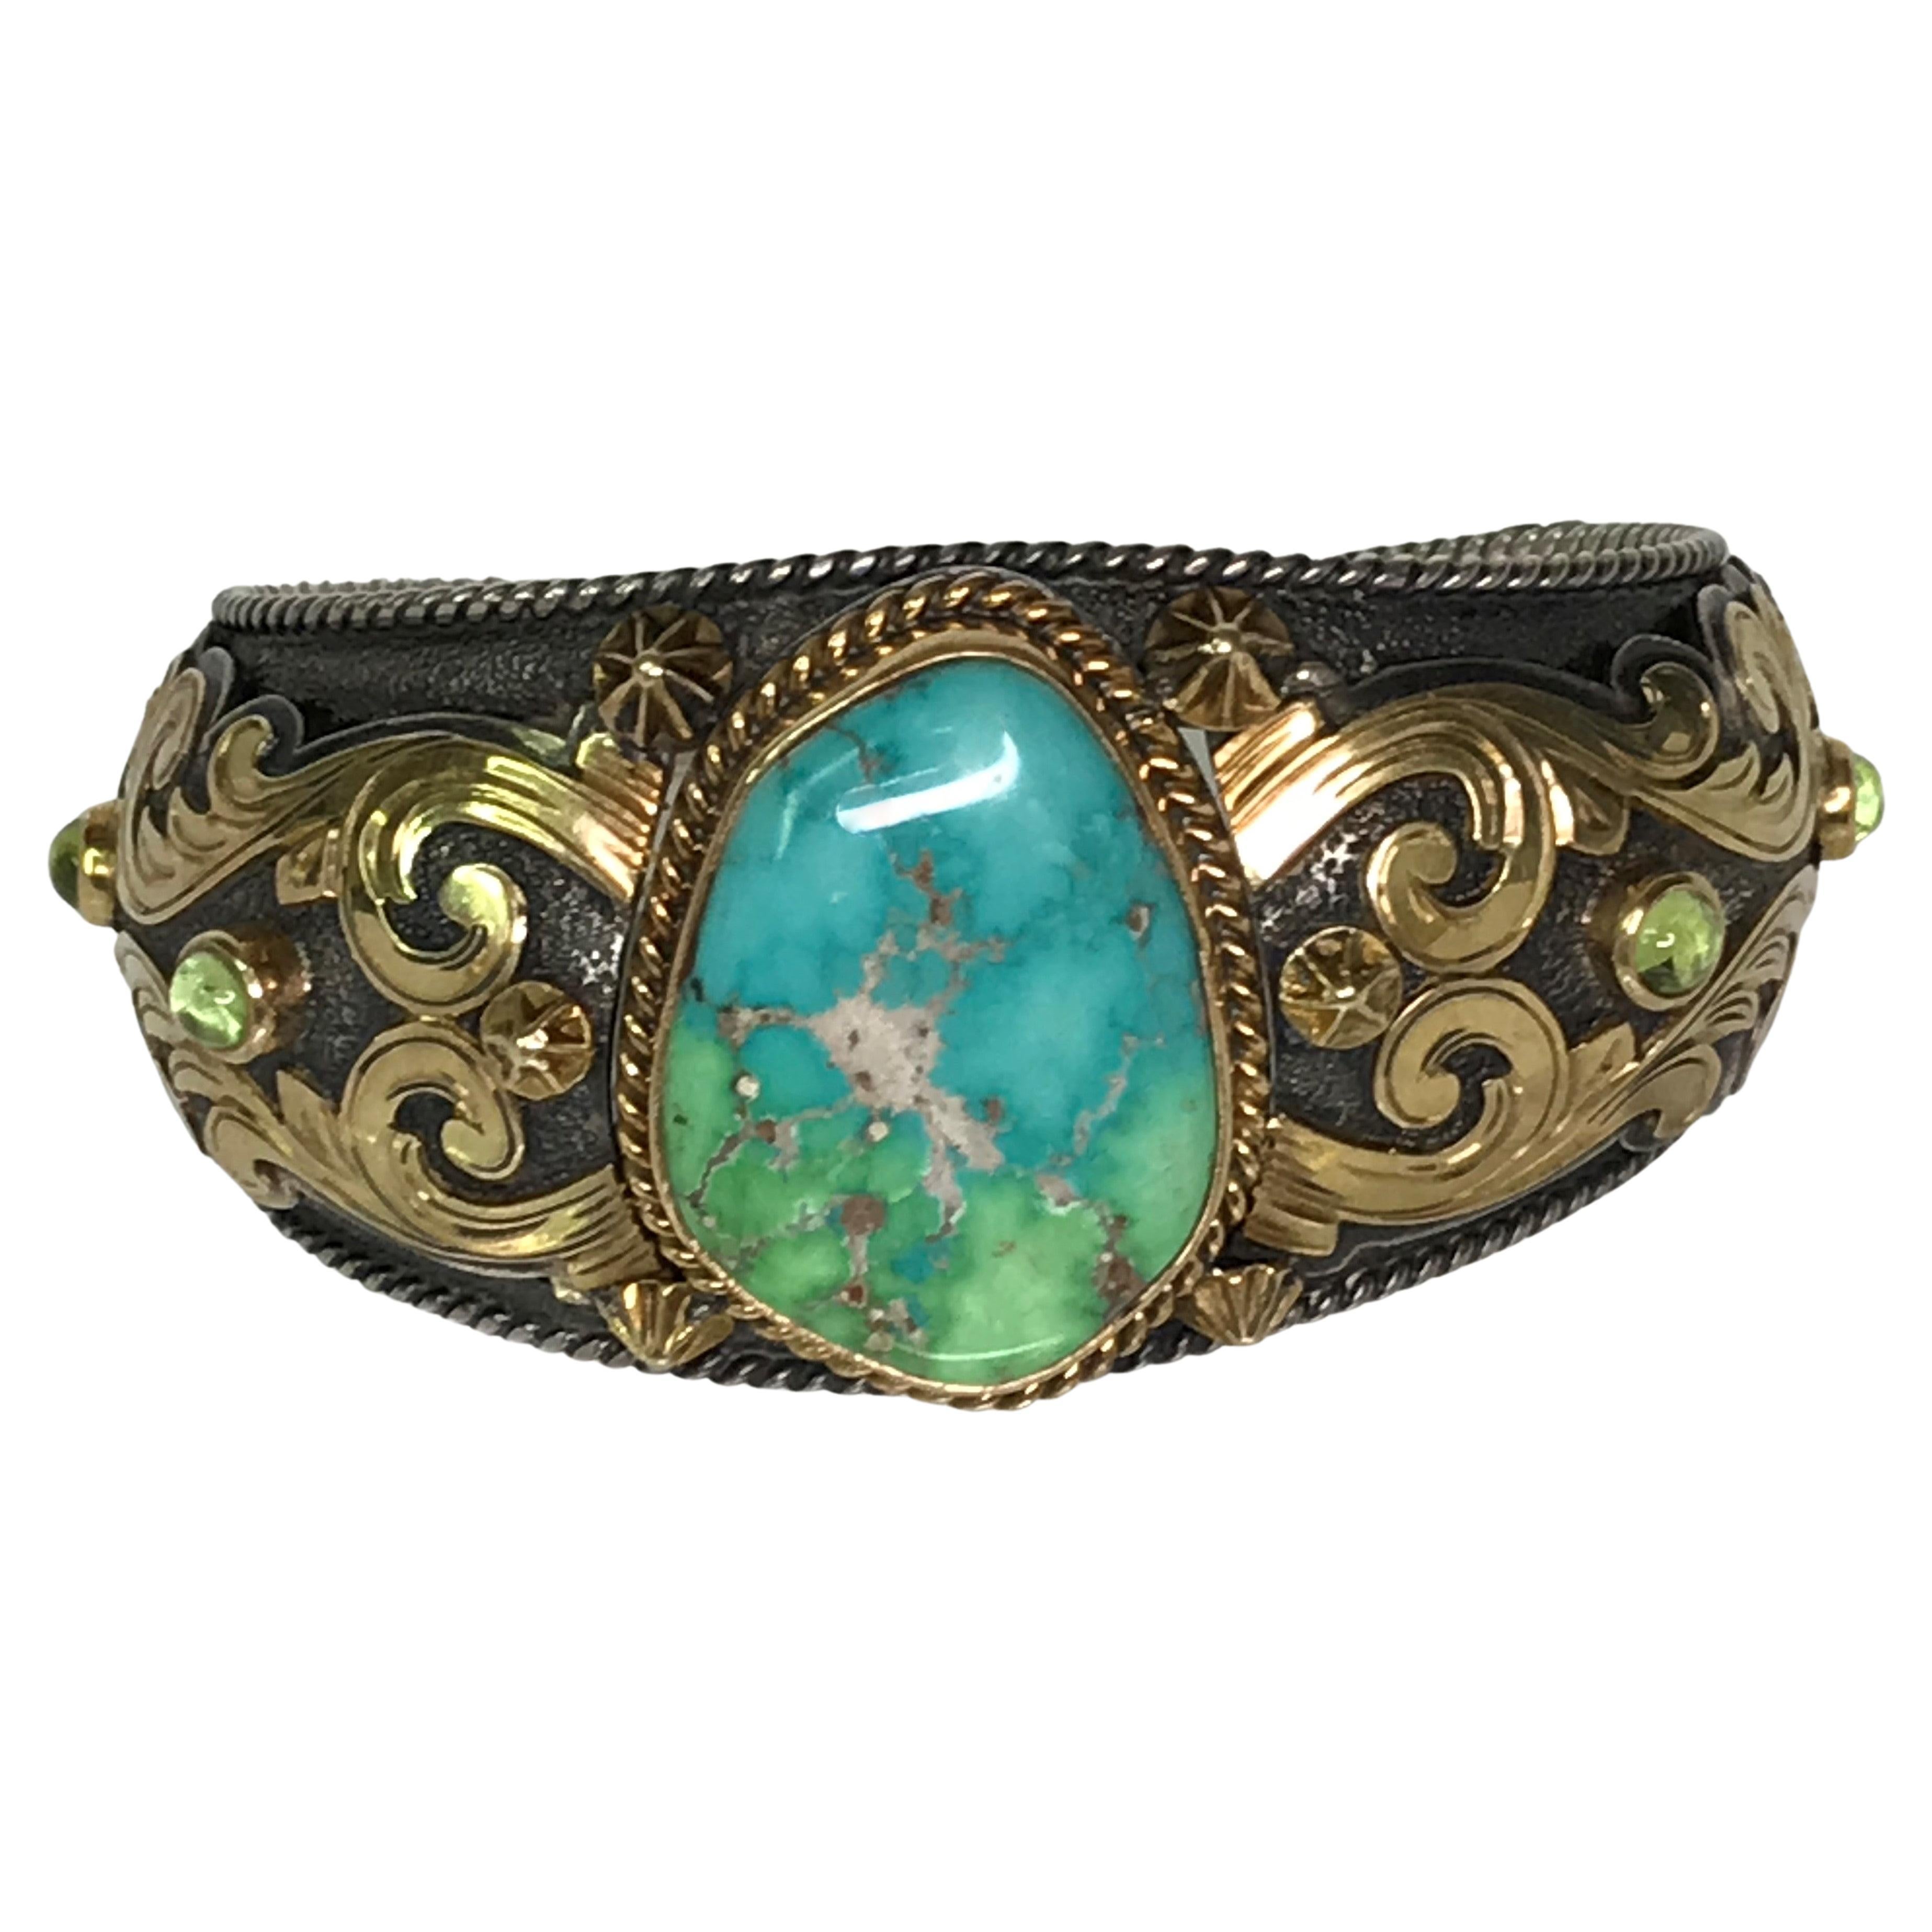 Mona Van Riper Turquoise Silver and Gold Bracelet